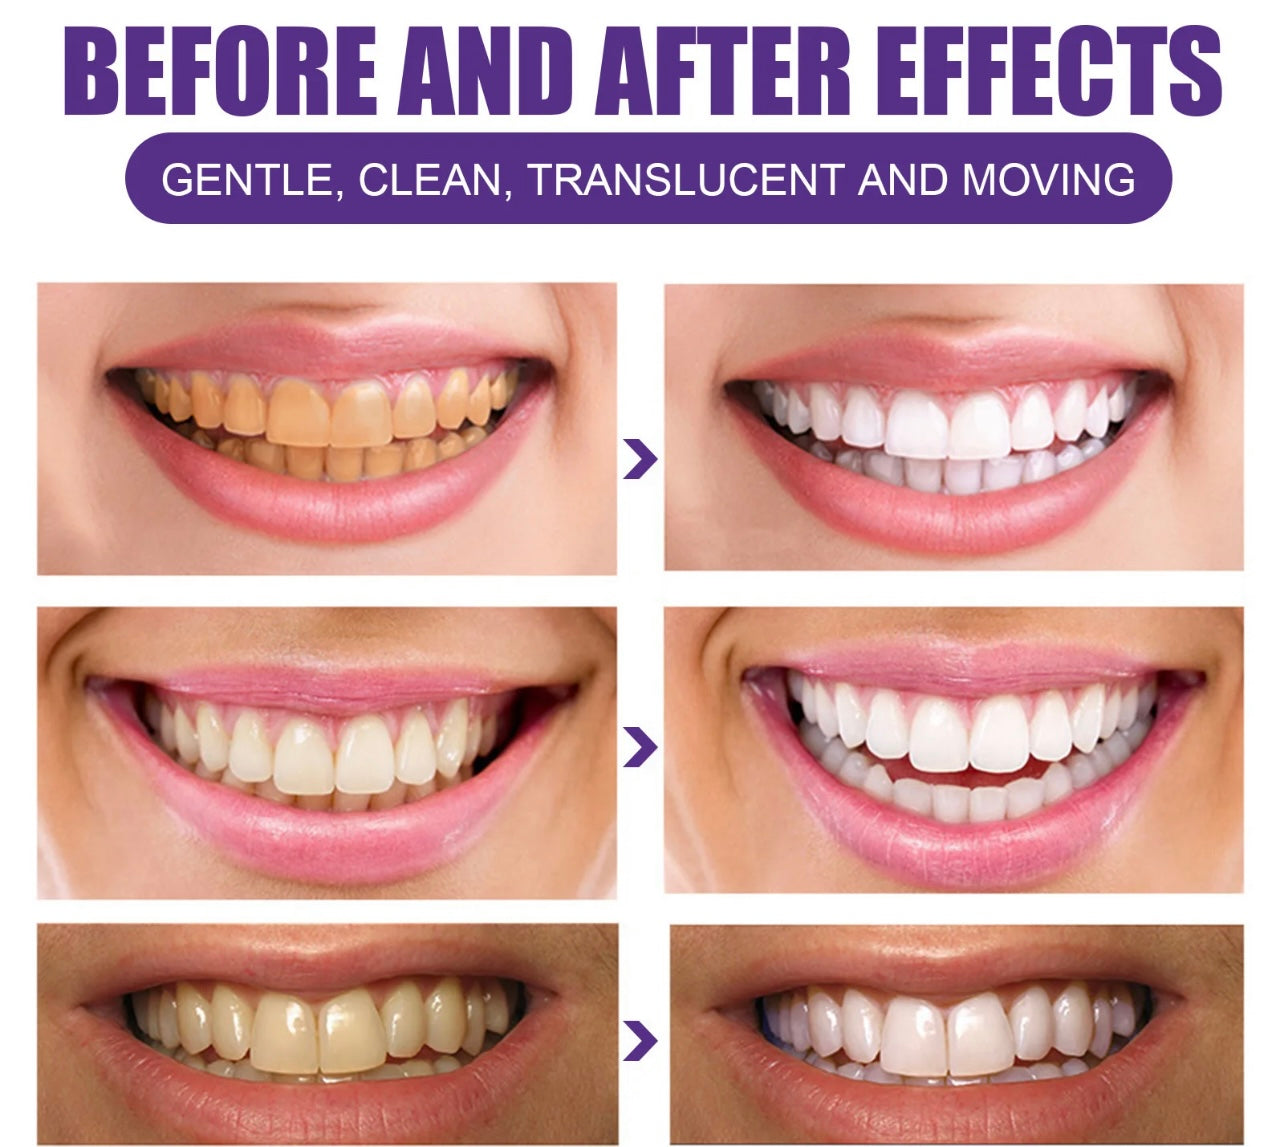 HiSmile Deep Purple Color Correcting Teeth Whitening. a fast, effective, and safe way to achieve a bright, healthy smile. stains, tooth discoloration TikTok viral products, TikTok made me by it. TikTok best items Whitening toothpaste, Whiten yellow teeth, whiten teeth naturally, whiten teeth from smoking, whiten teeth at home, TikTok viral, TikTok trends, TikTok made me buy it, tiktok best products,tik tok viral products, teeth whitening toothpaste, teeth whitening, teeth, stop tooth sensitivity